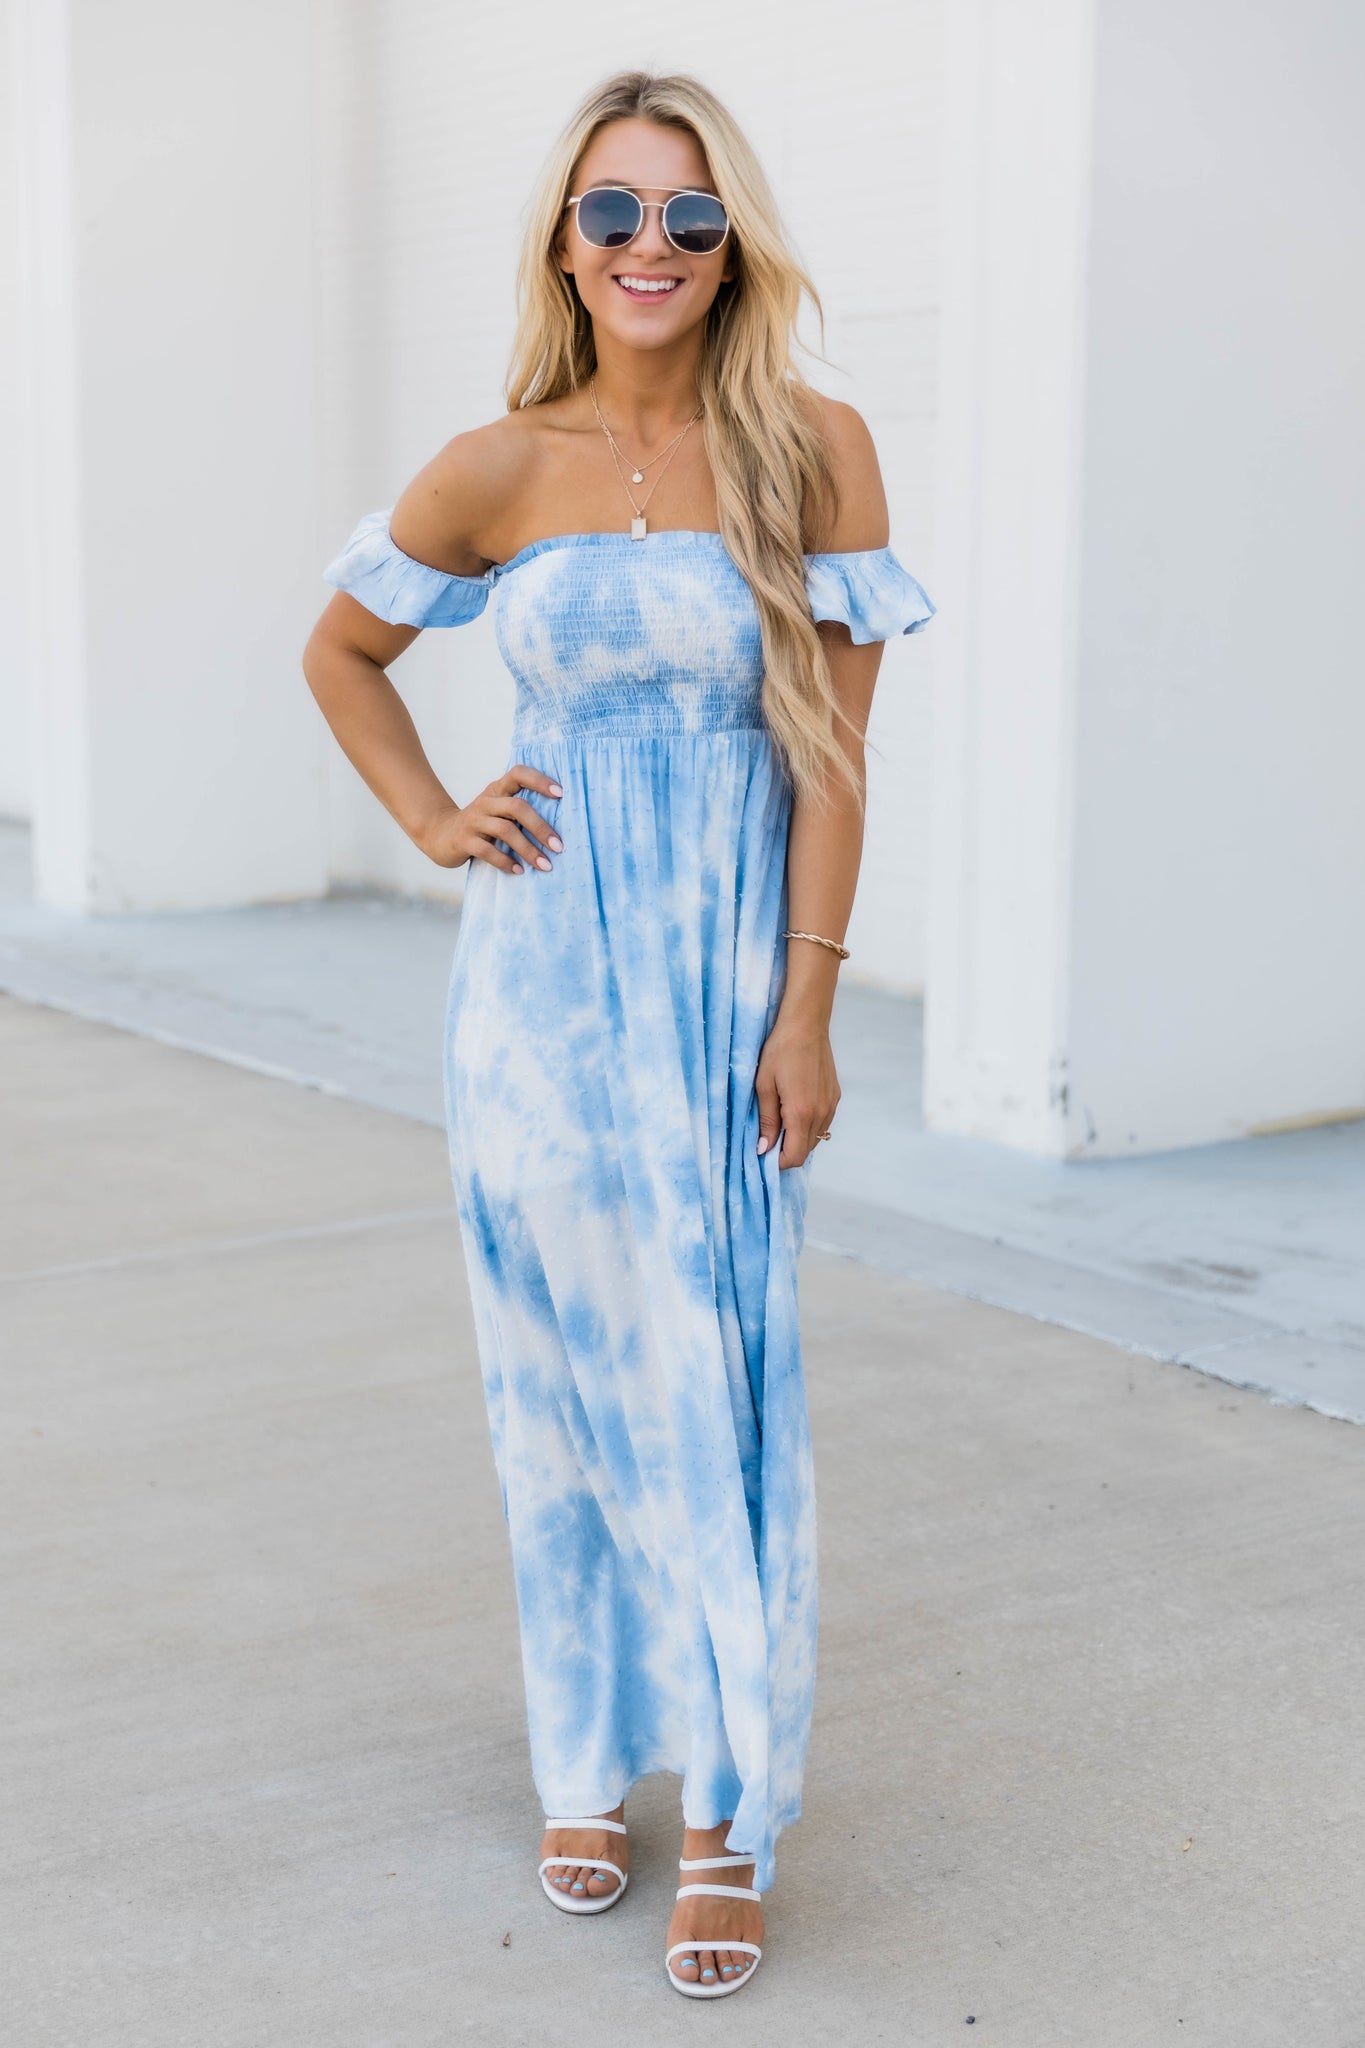 pink and blue tie dye dress